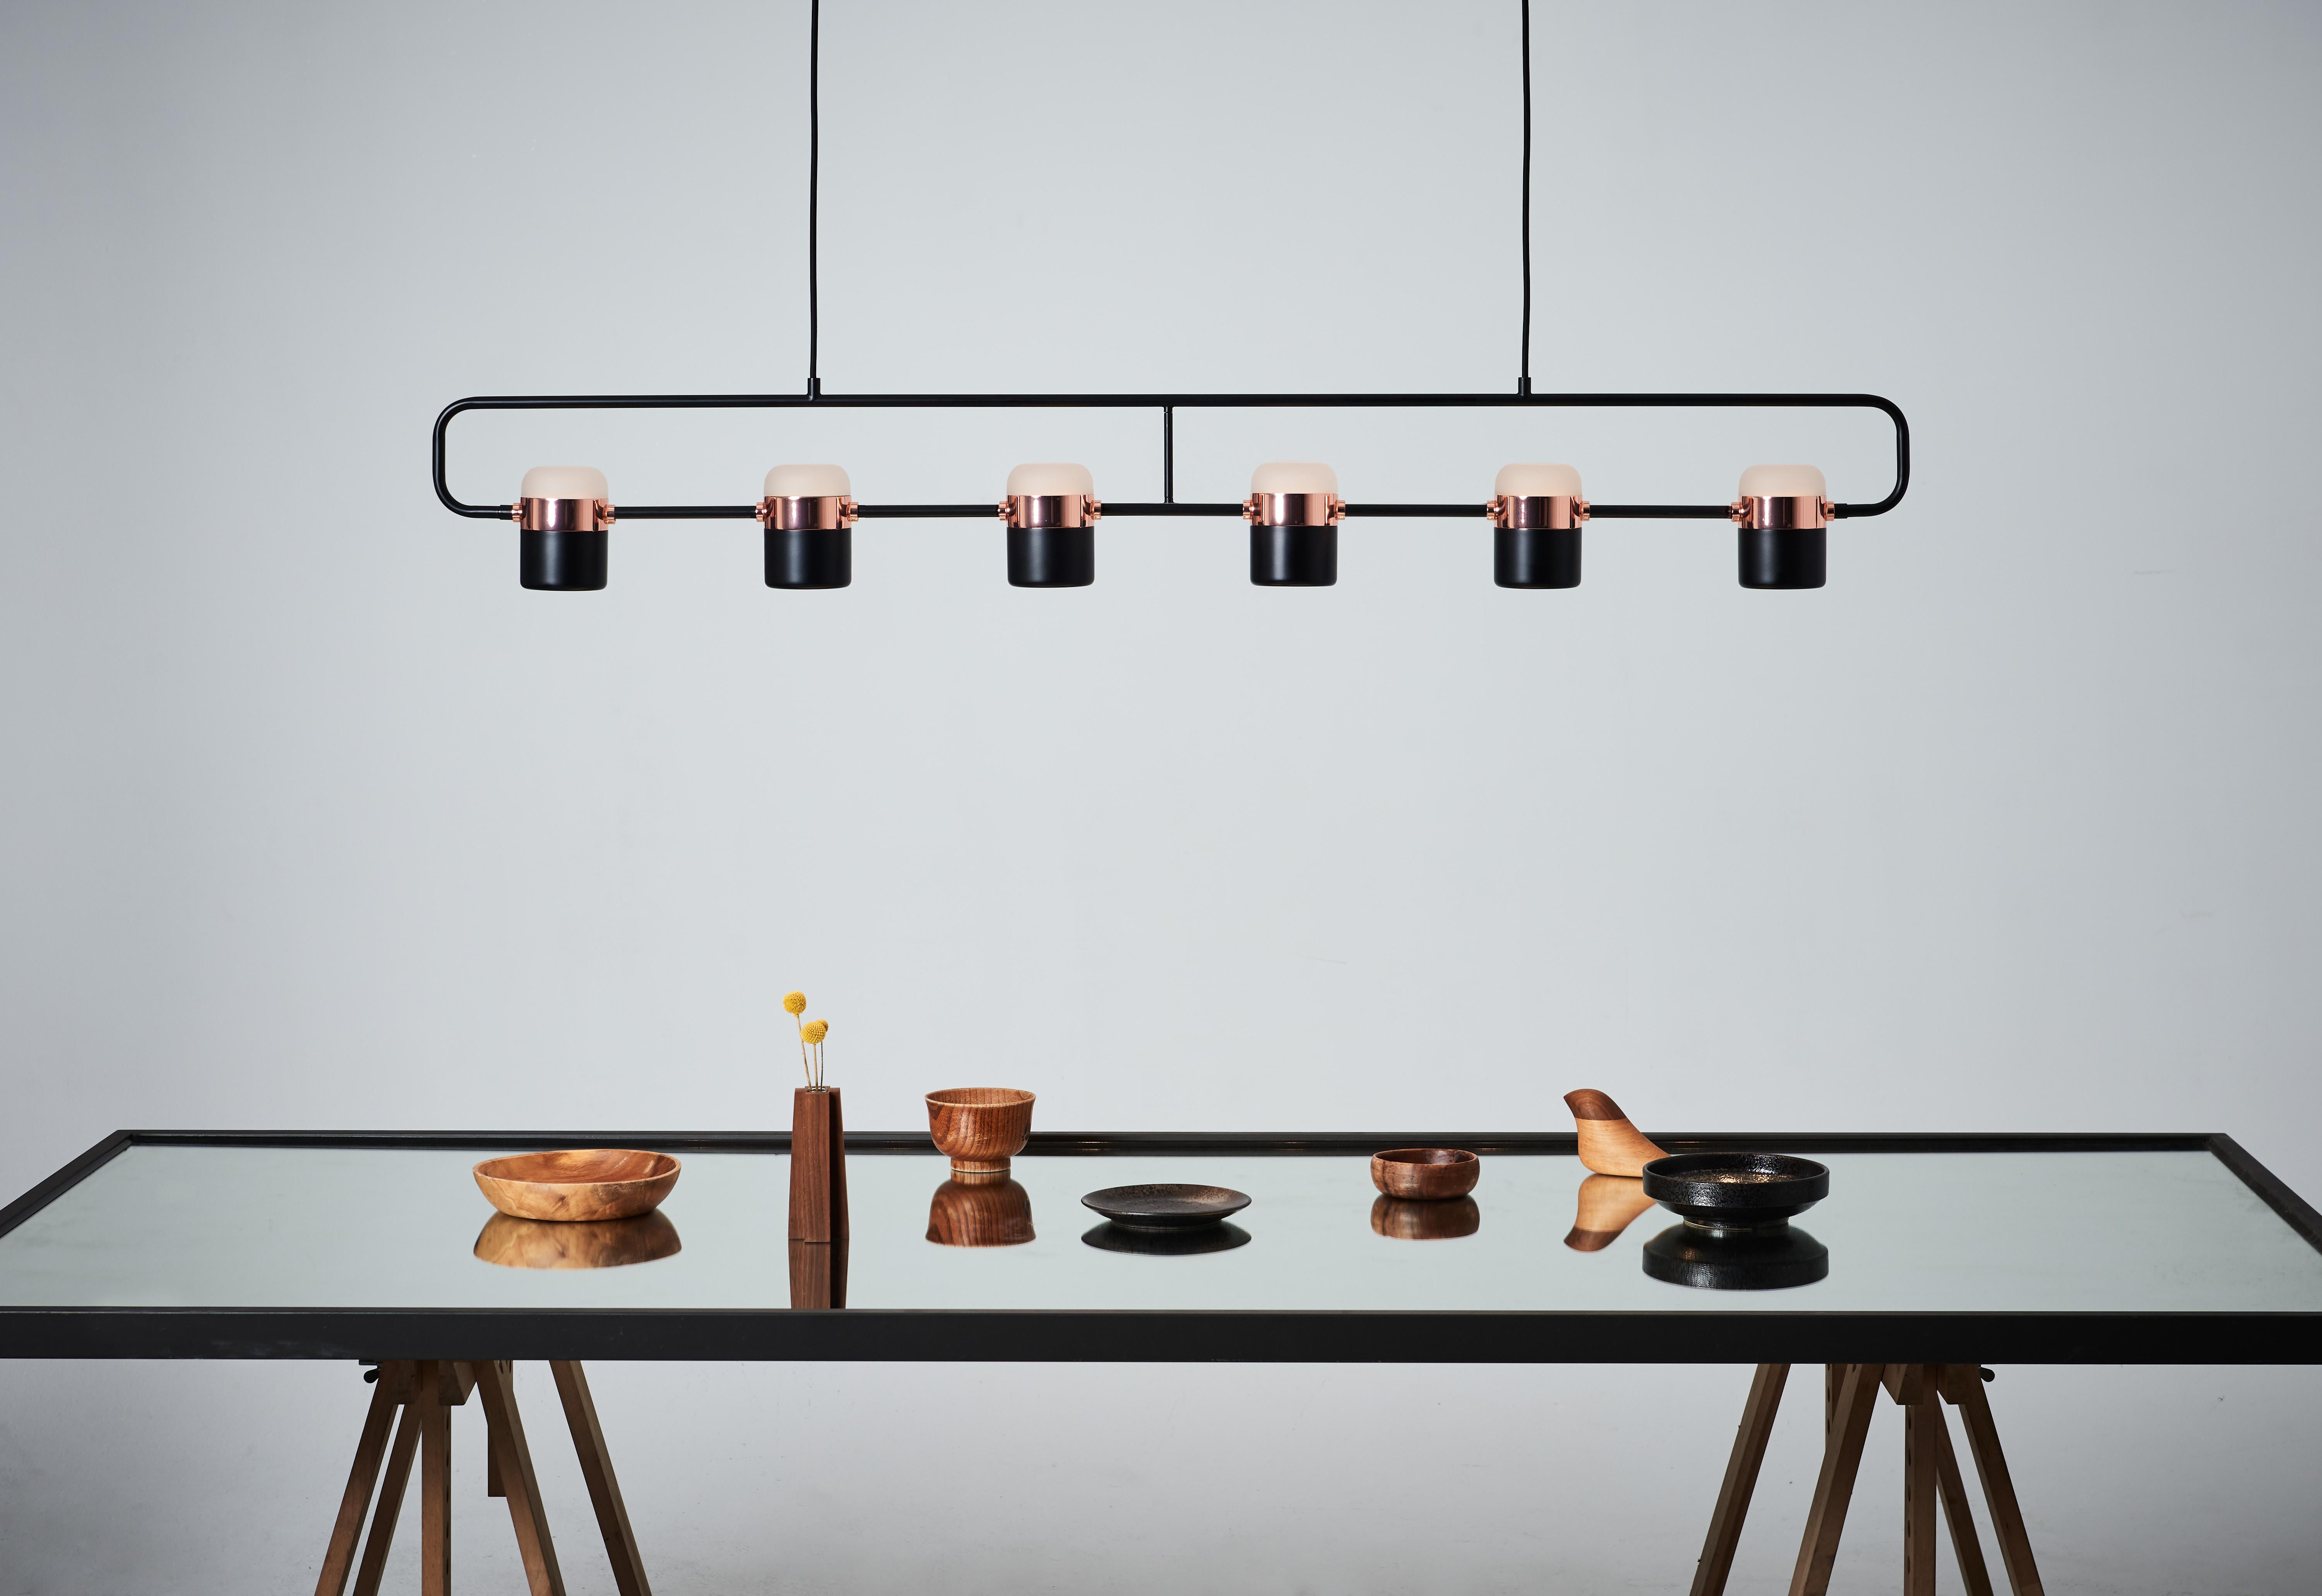 LING Pendant 6 is a harmonious mingle of minimalism and nostalgia design which is inspired by patterned metal-fence used to be built around balconies and windows in early Taiwan. The copper/ brass glow elegantly connects glass and metal shade.